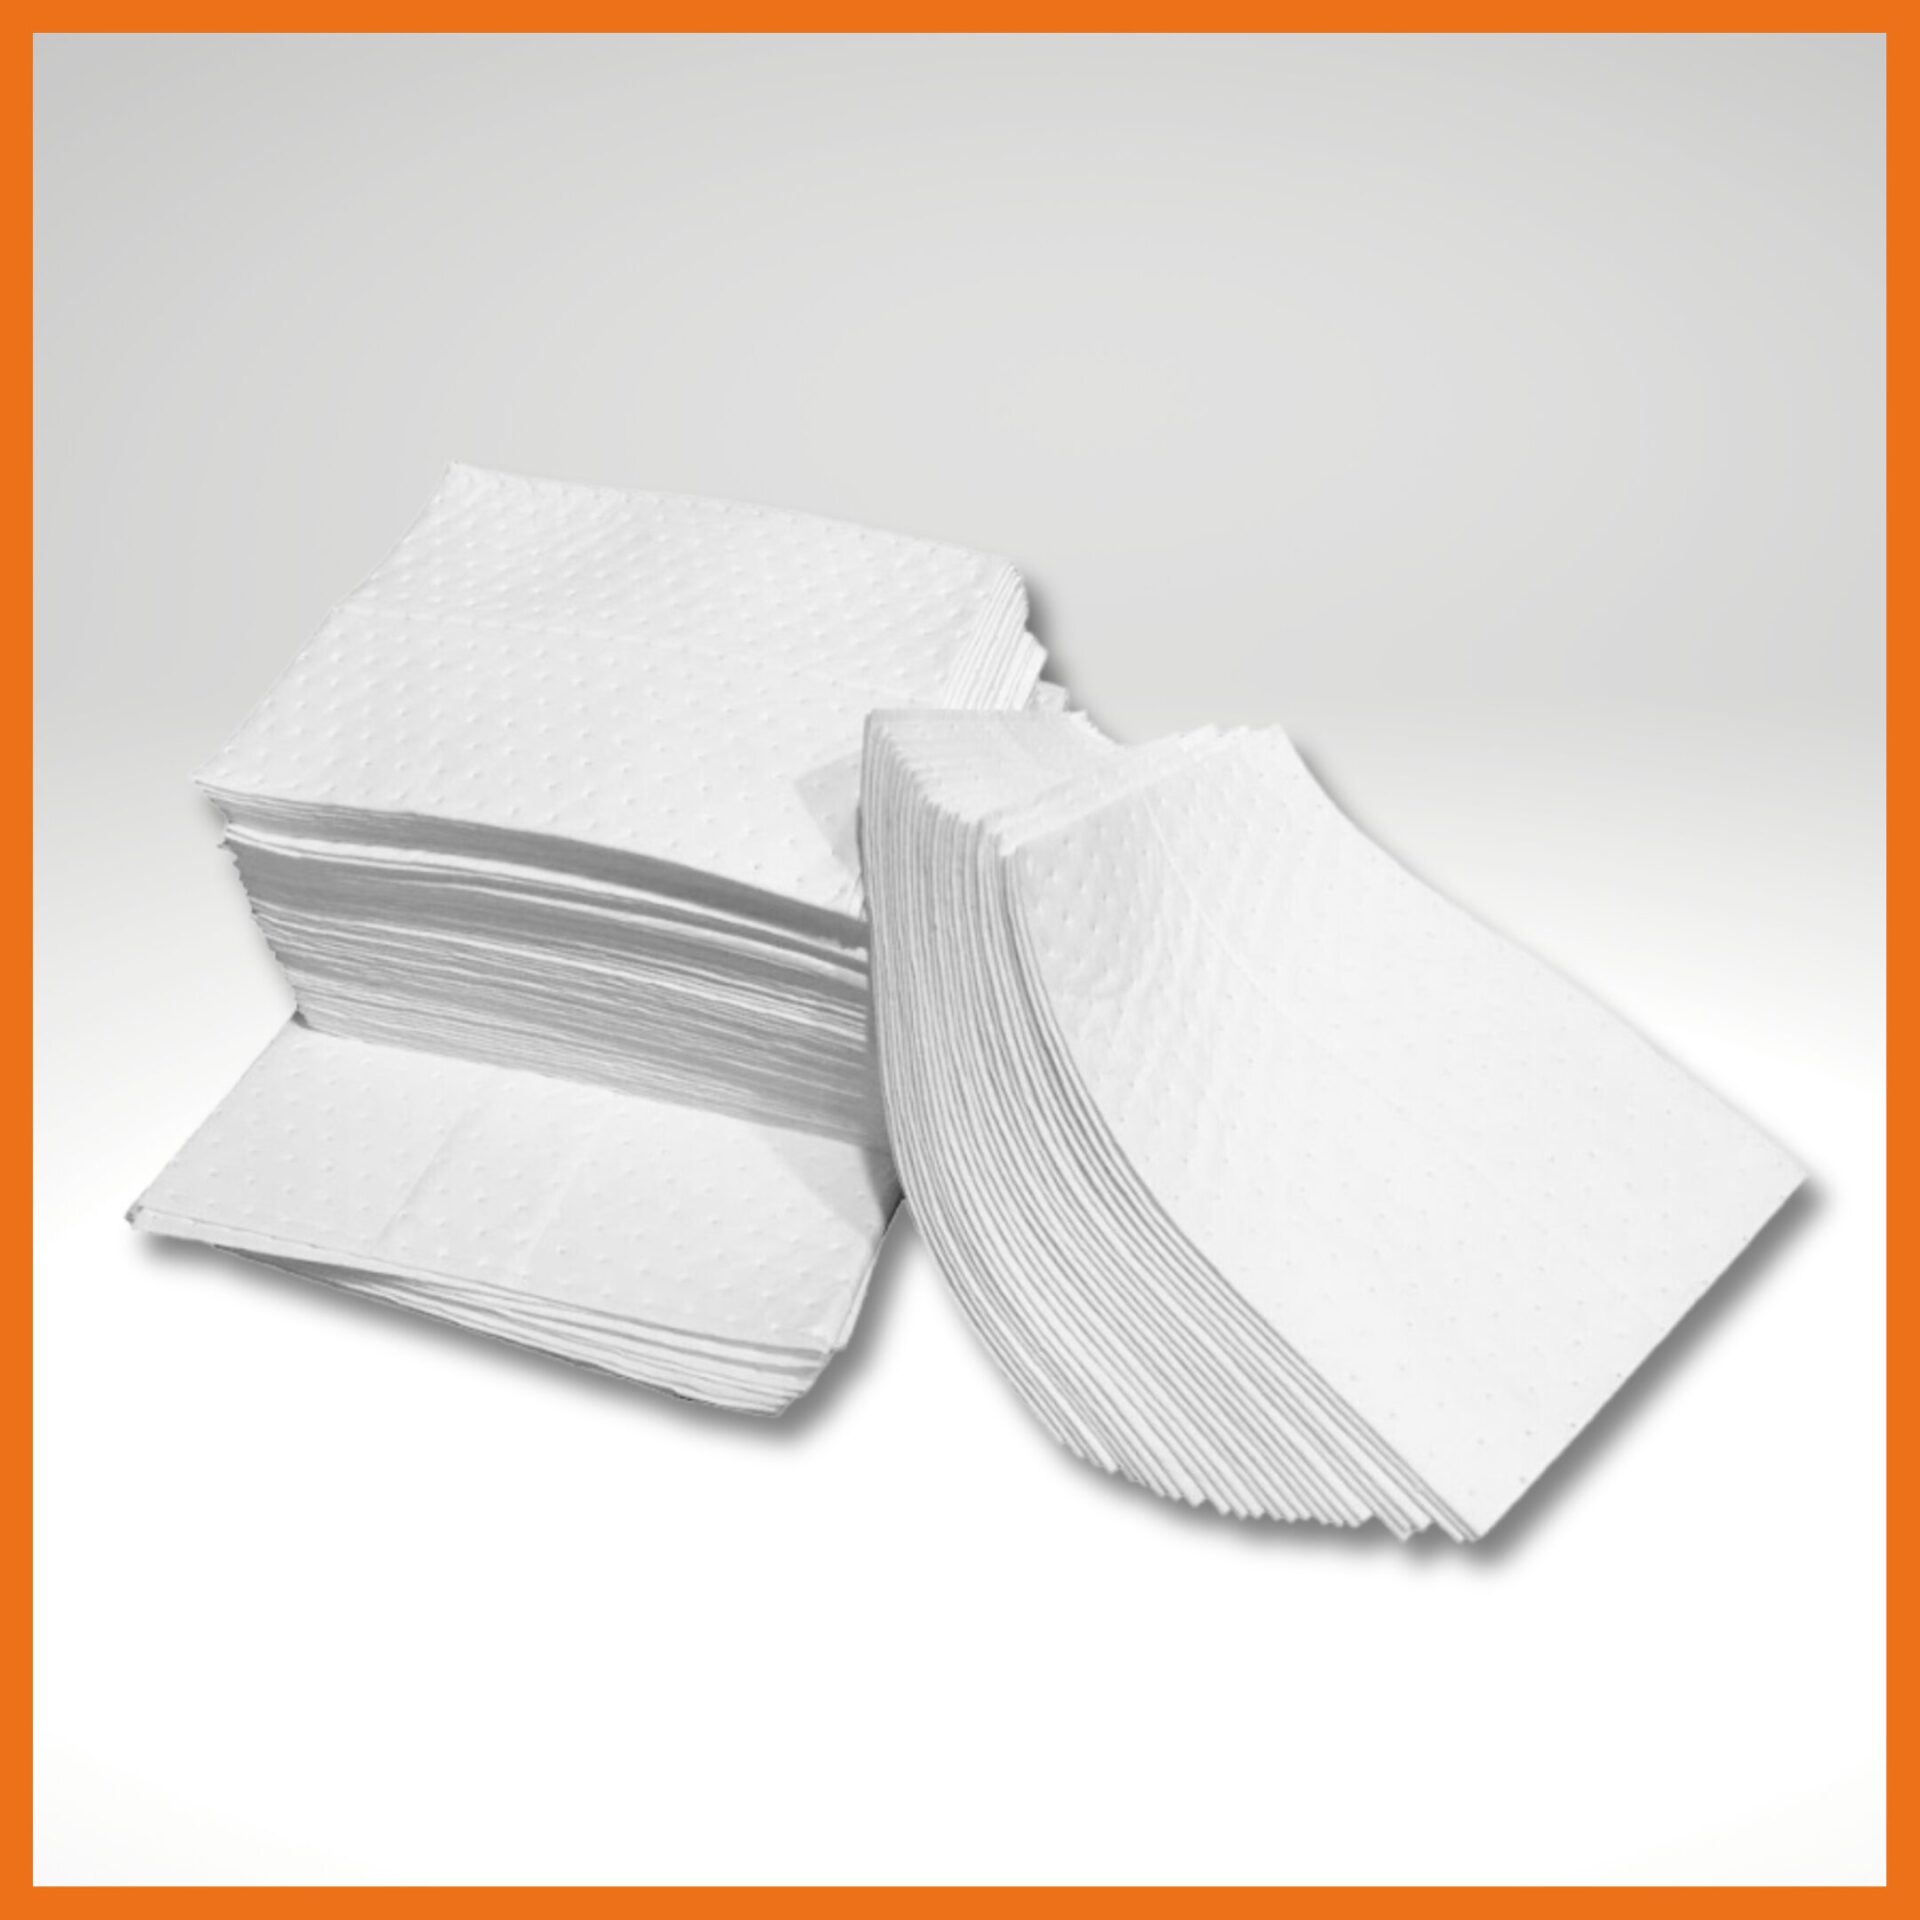 Oil-Only Sorbent Pads (EP100s)